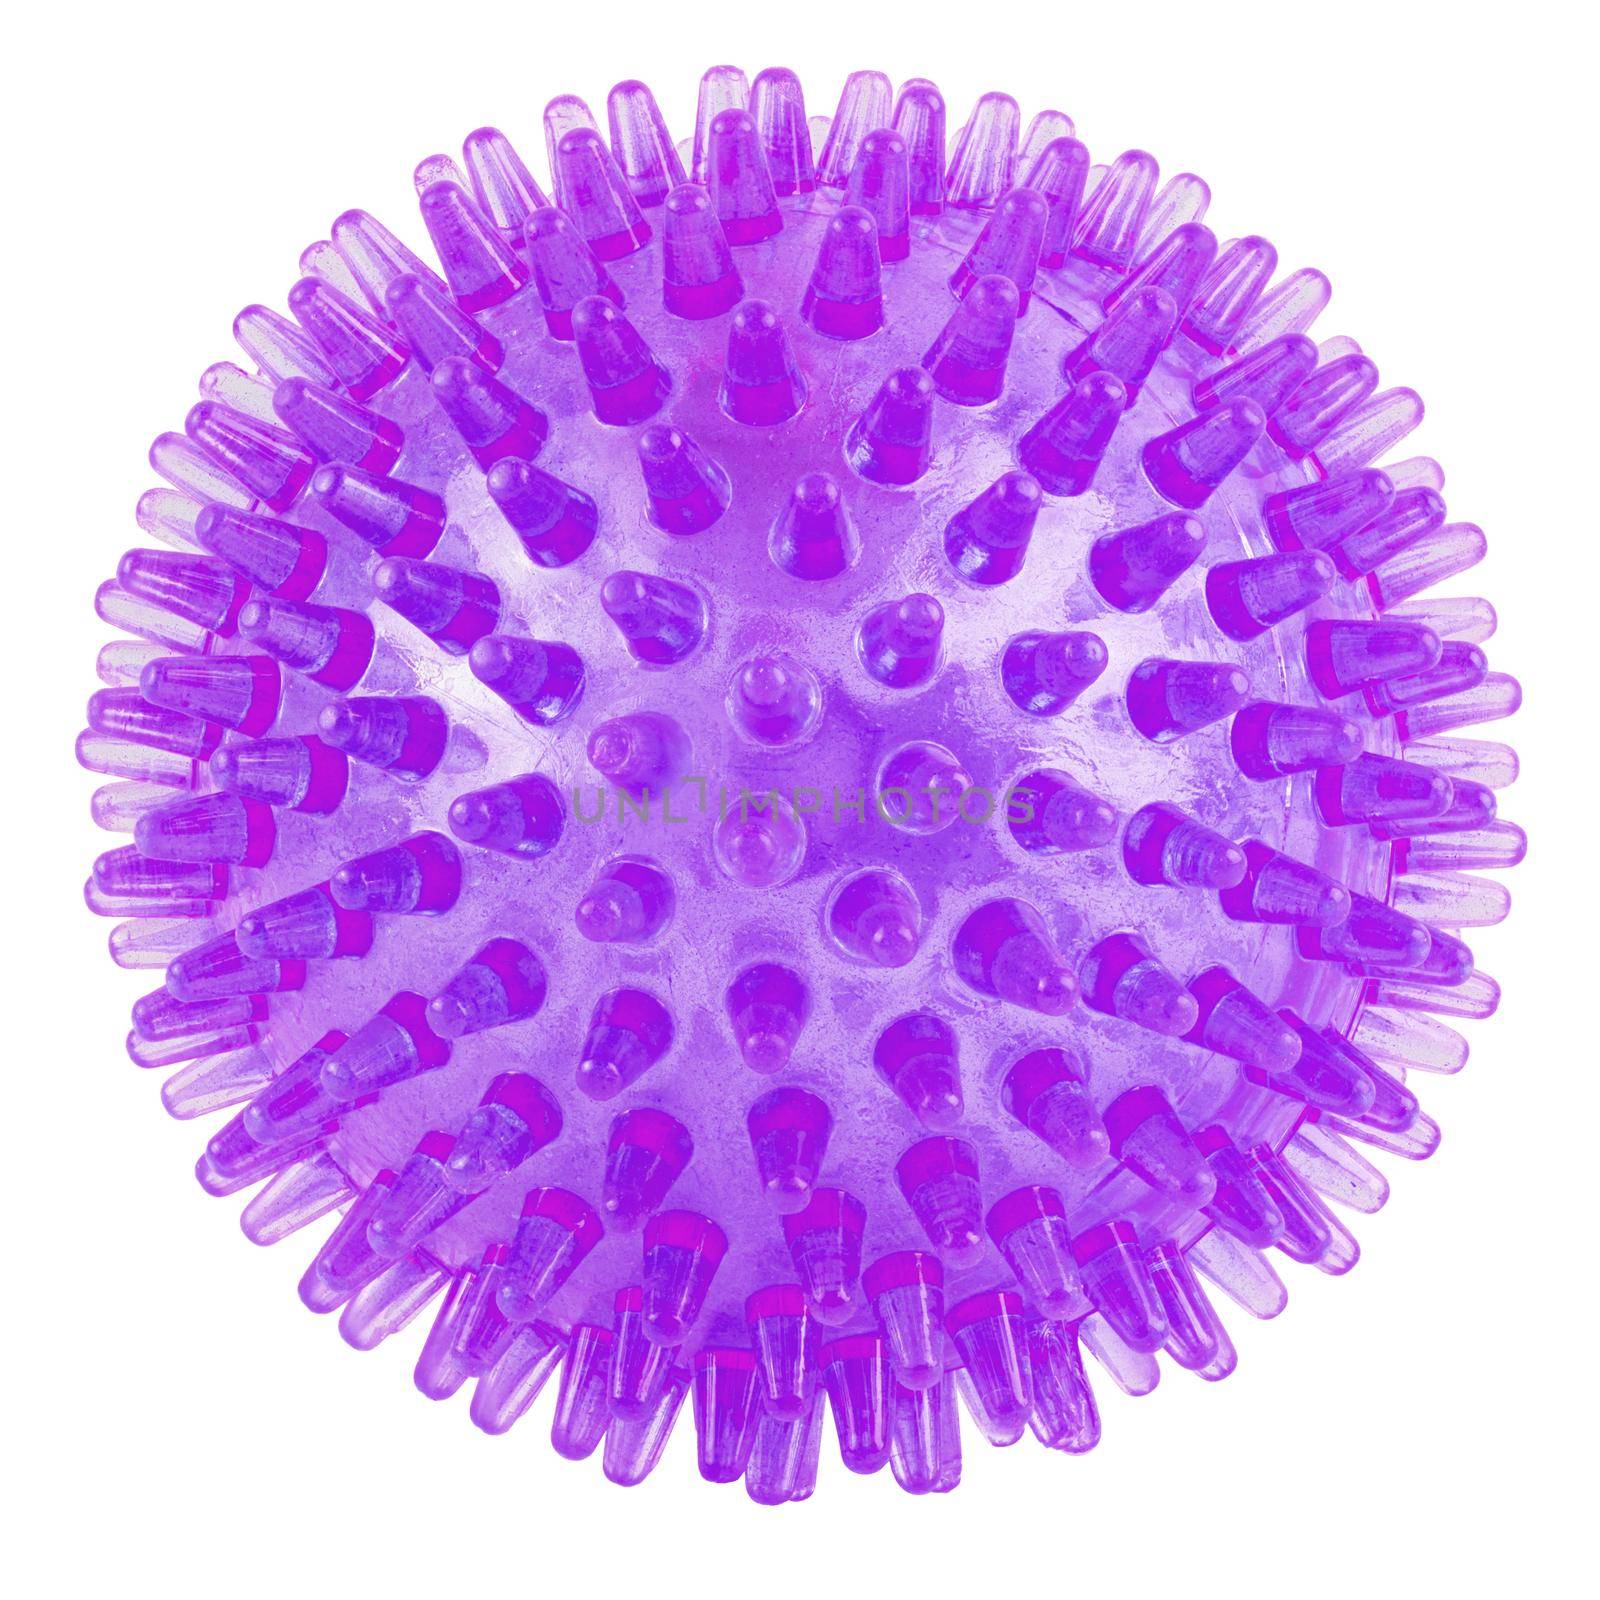 transparent purple spiked plastic ball isolated on white background - massager, dog toy and COVID-19 coronavirus symbol and model